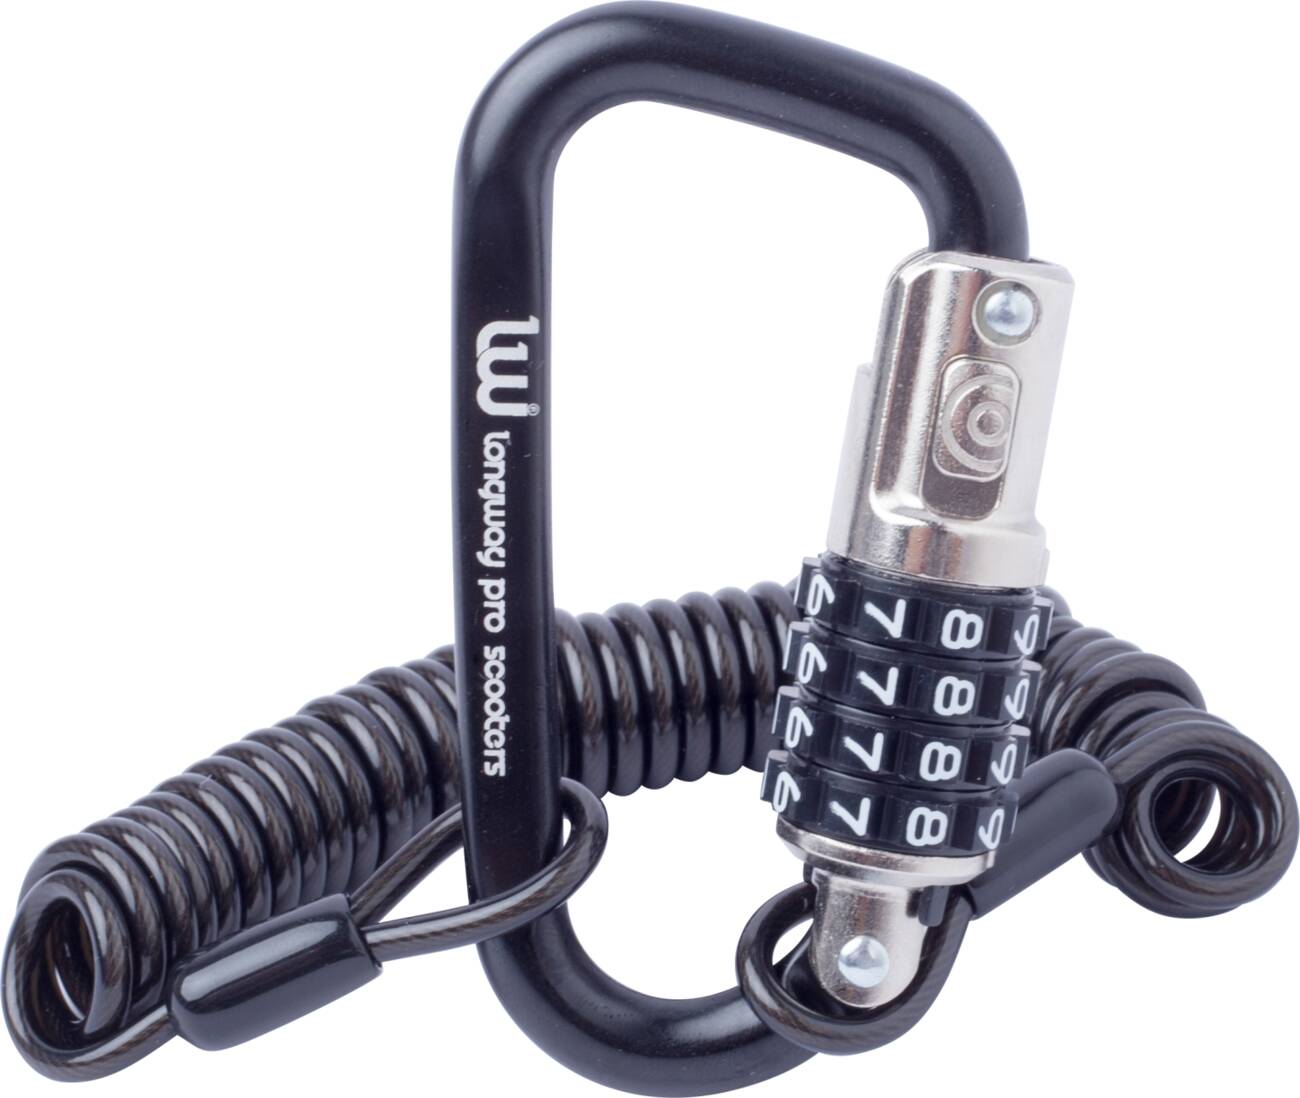 An image of Longway Scooter Carabiner Lock